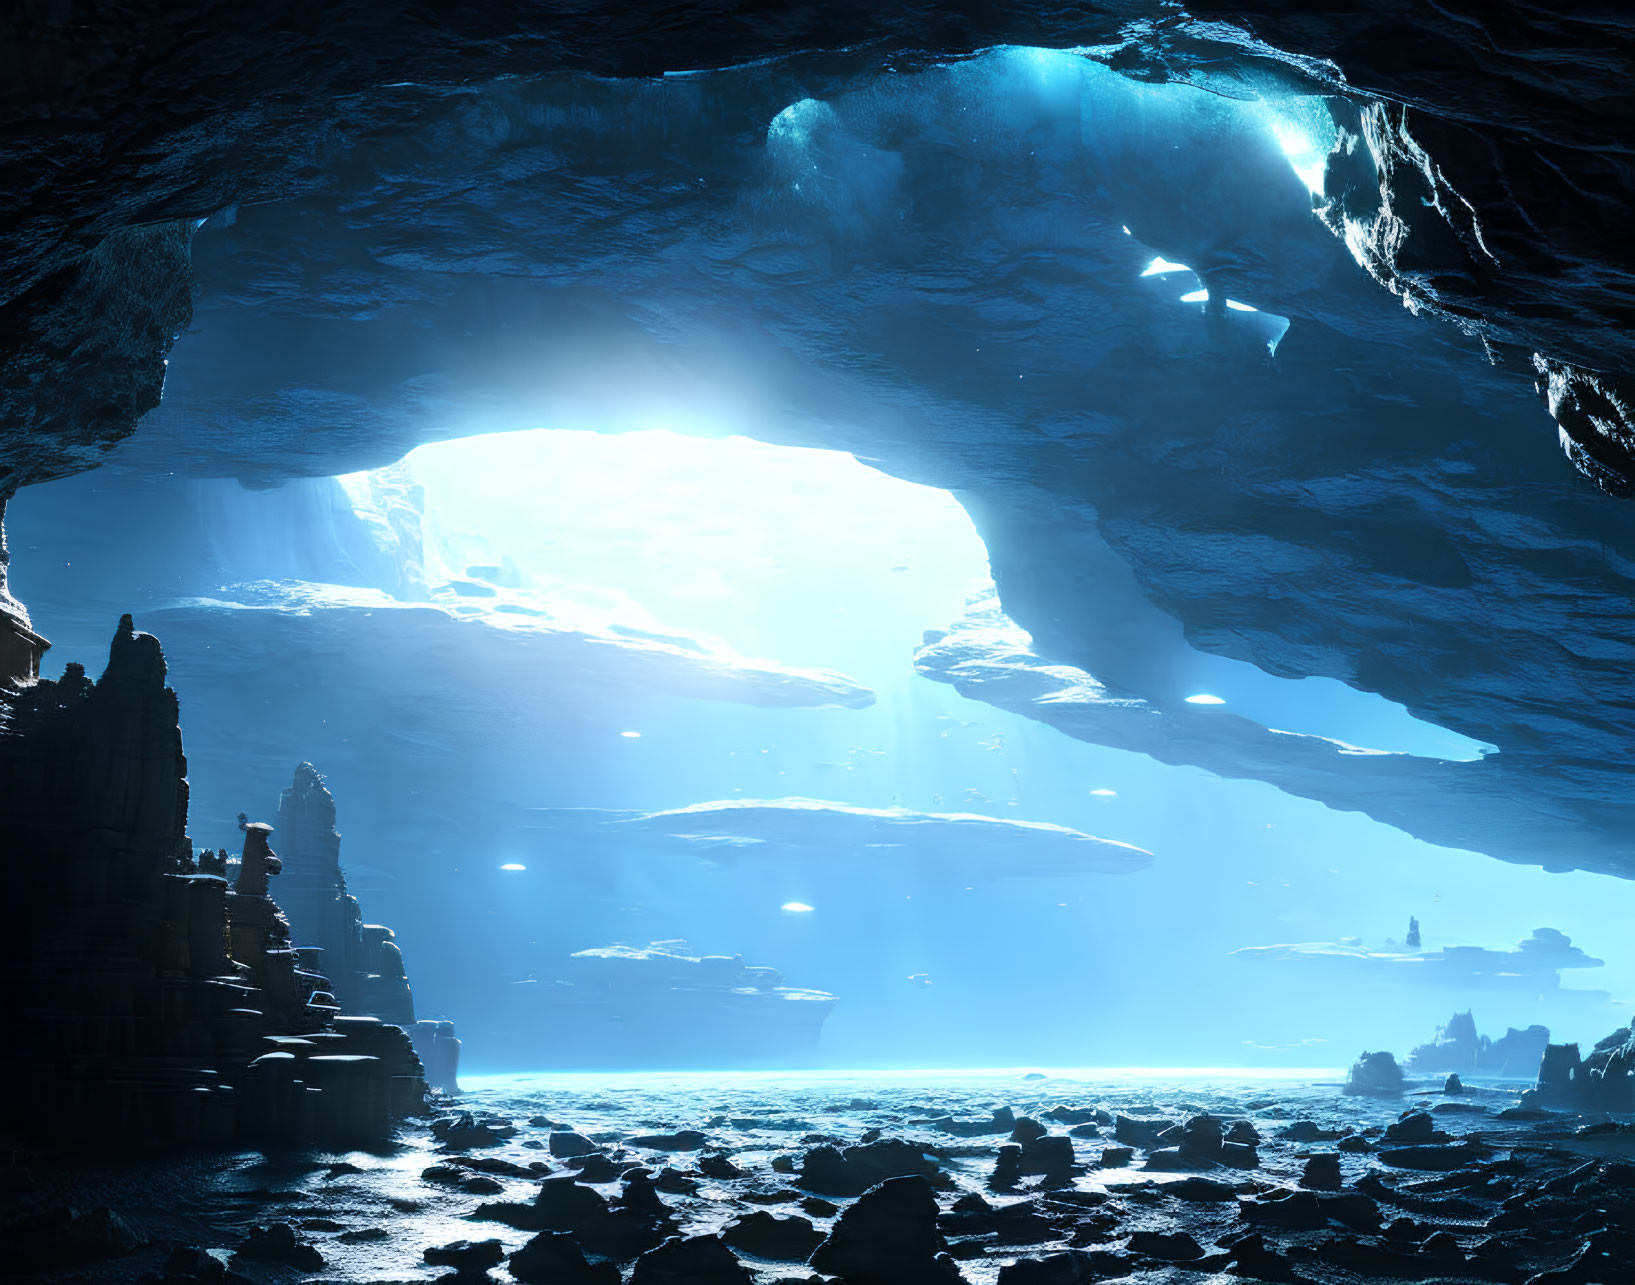 Majestic underground cavern with floating islands and rocky formations